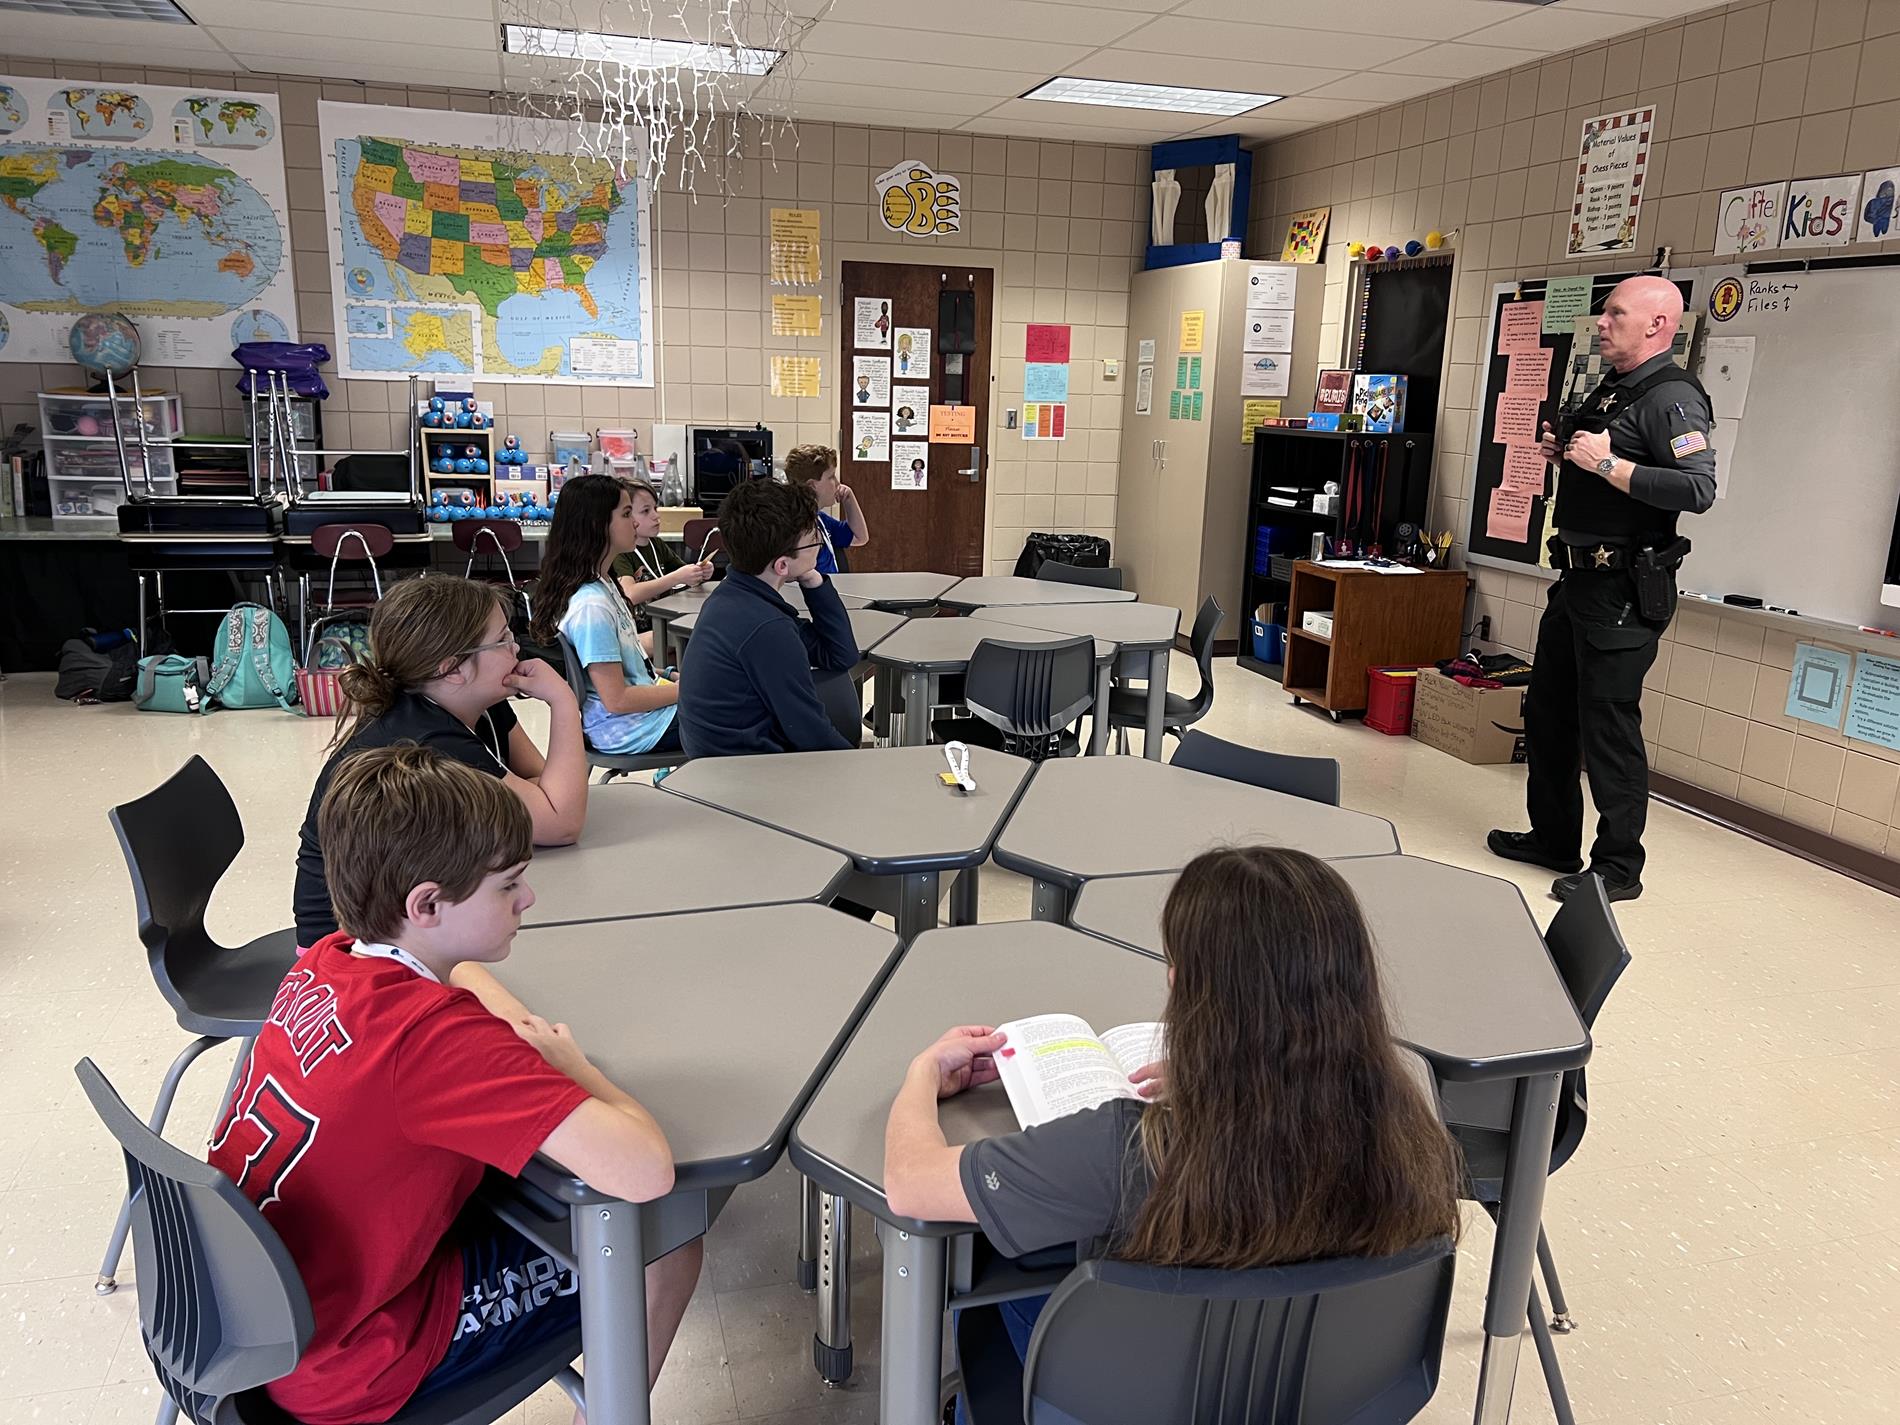 Officer Bradley spoke to the students about crime scene investigation.